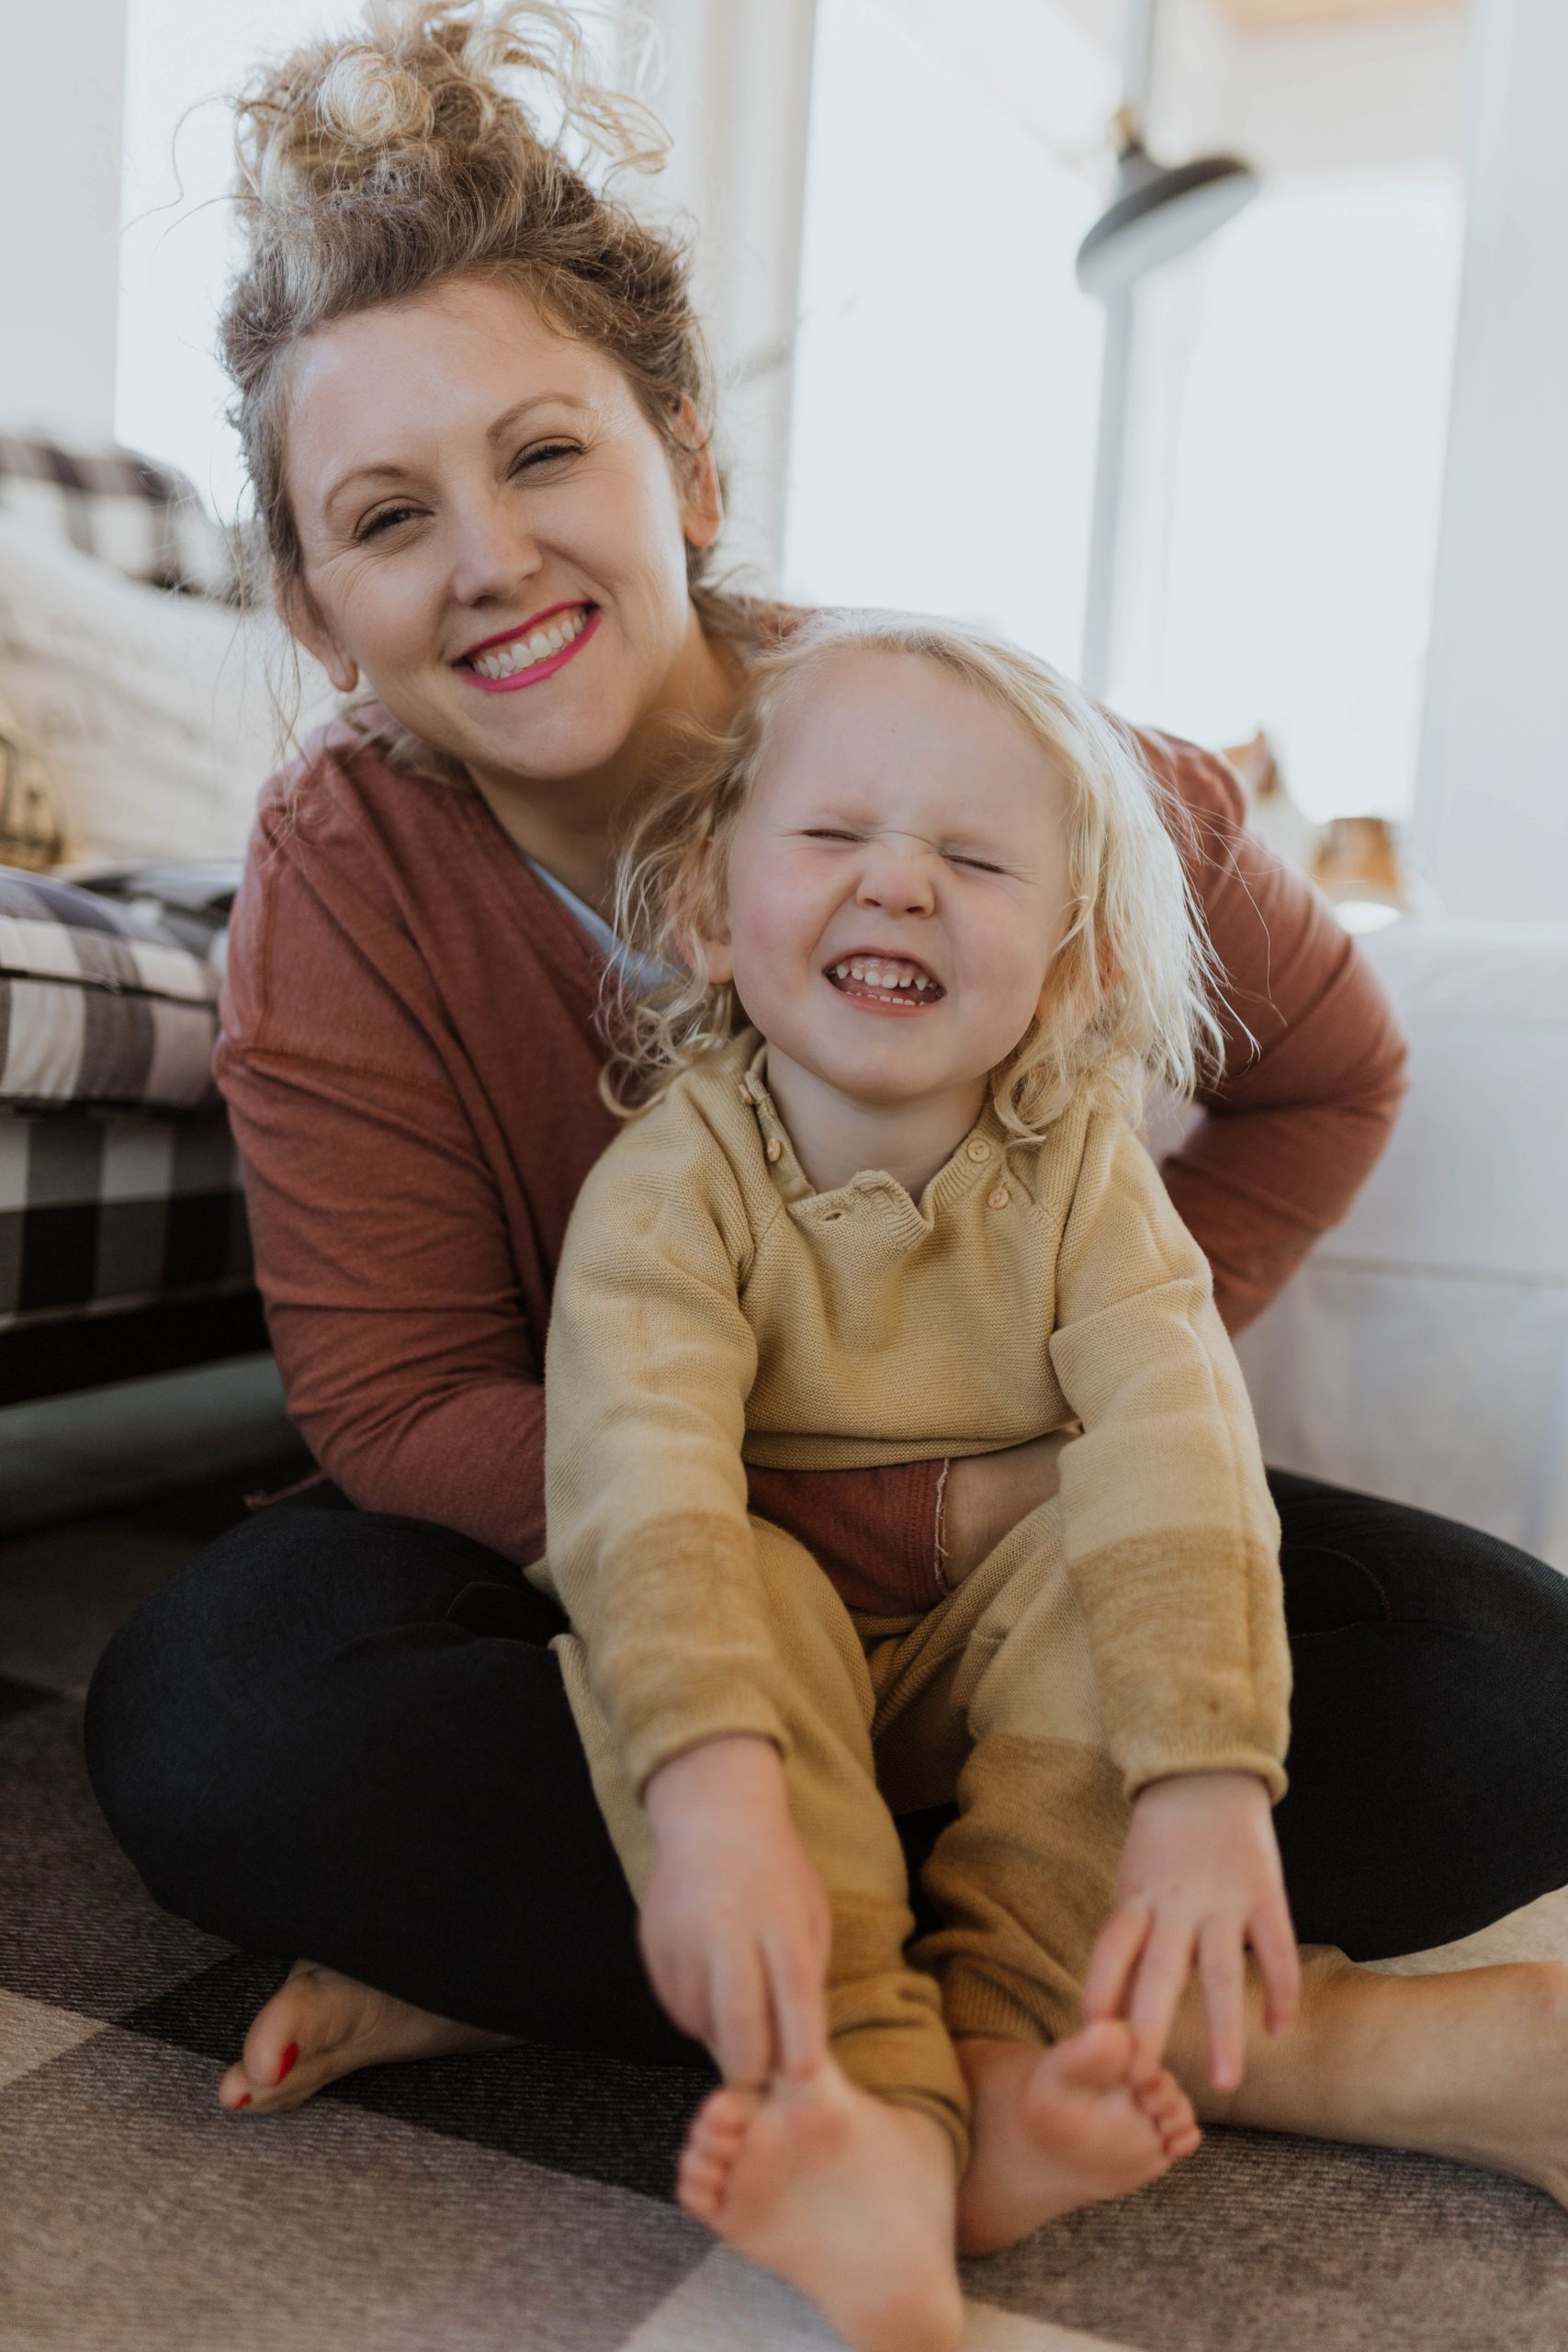 Three Things We Do for Toddler Health